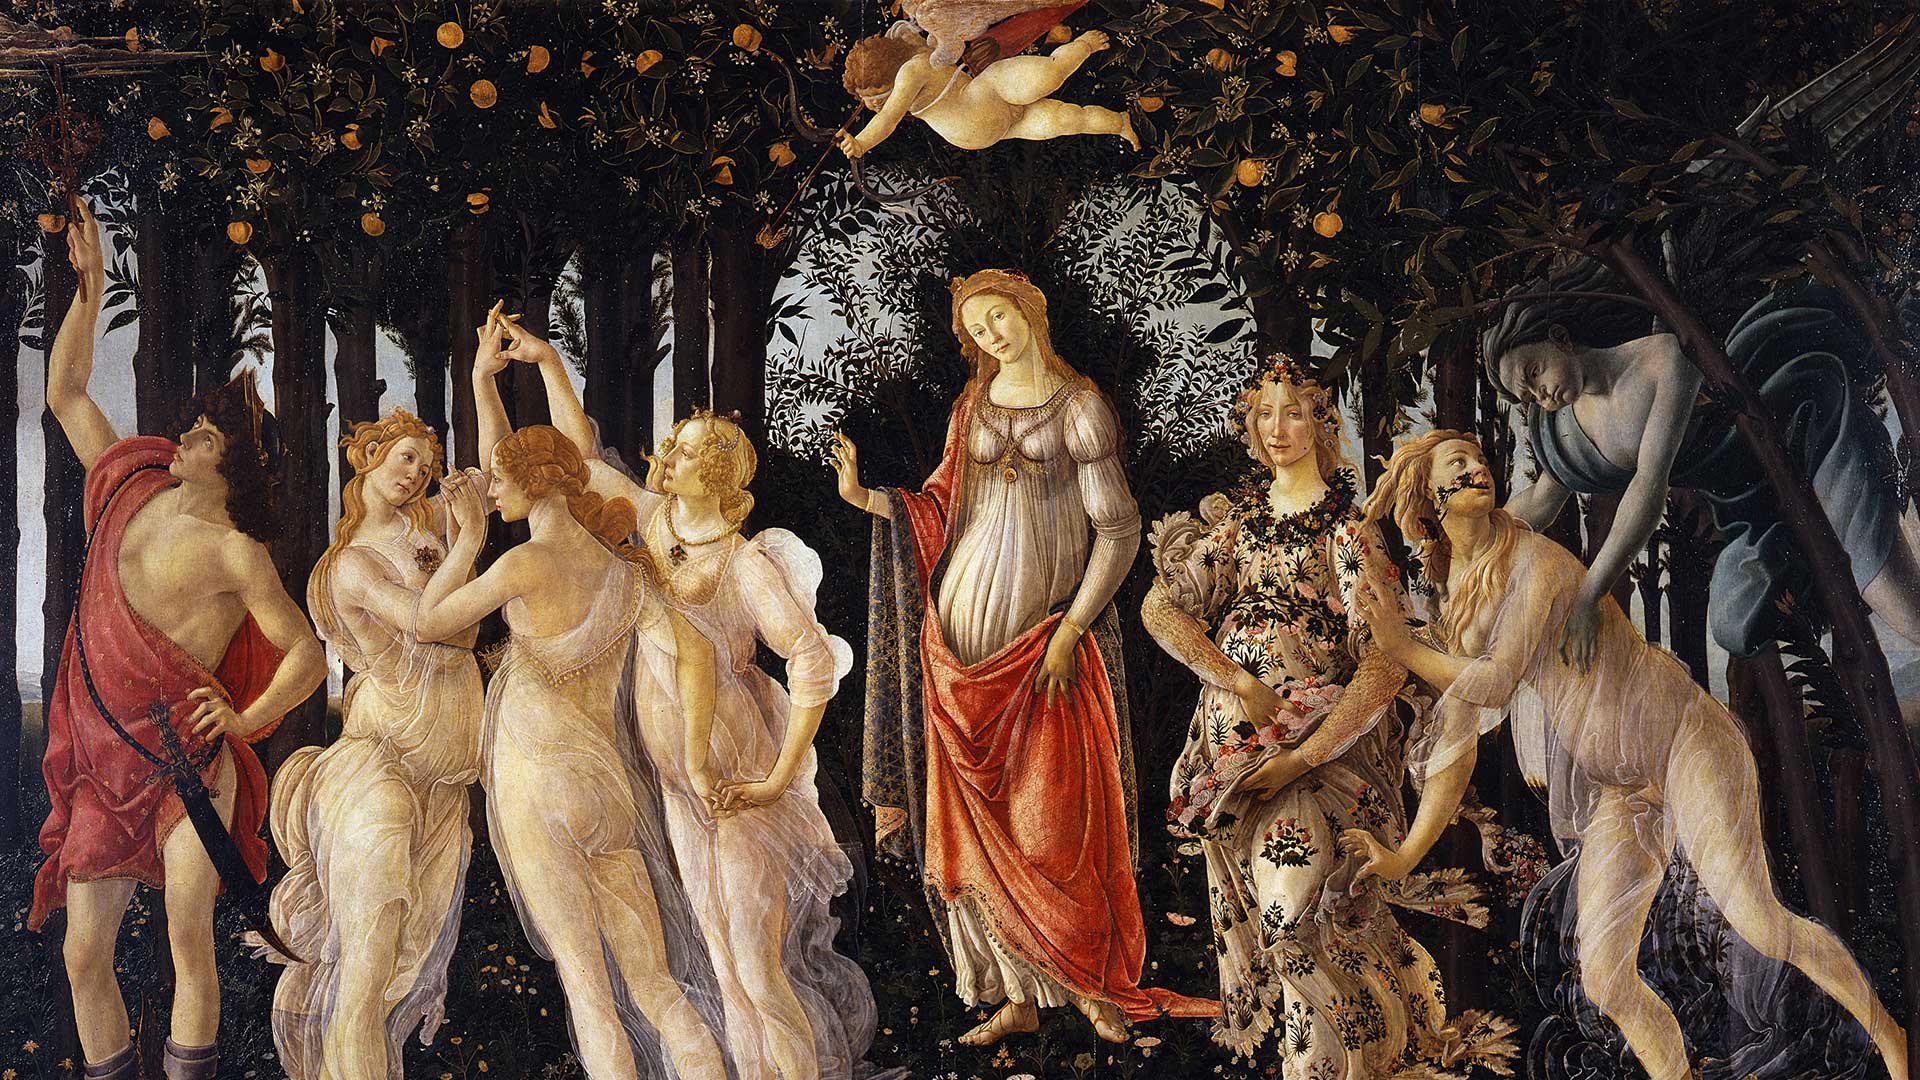 The Allegory of Spring